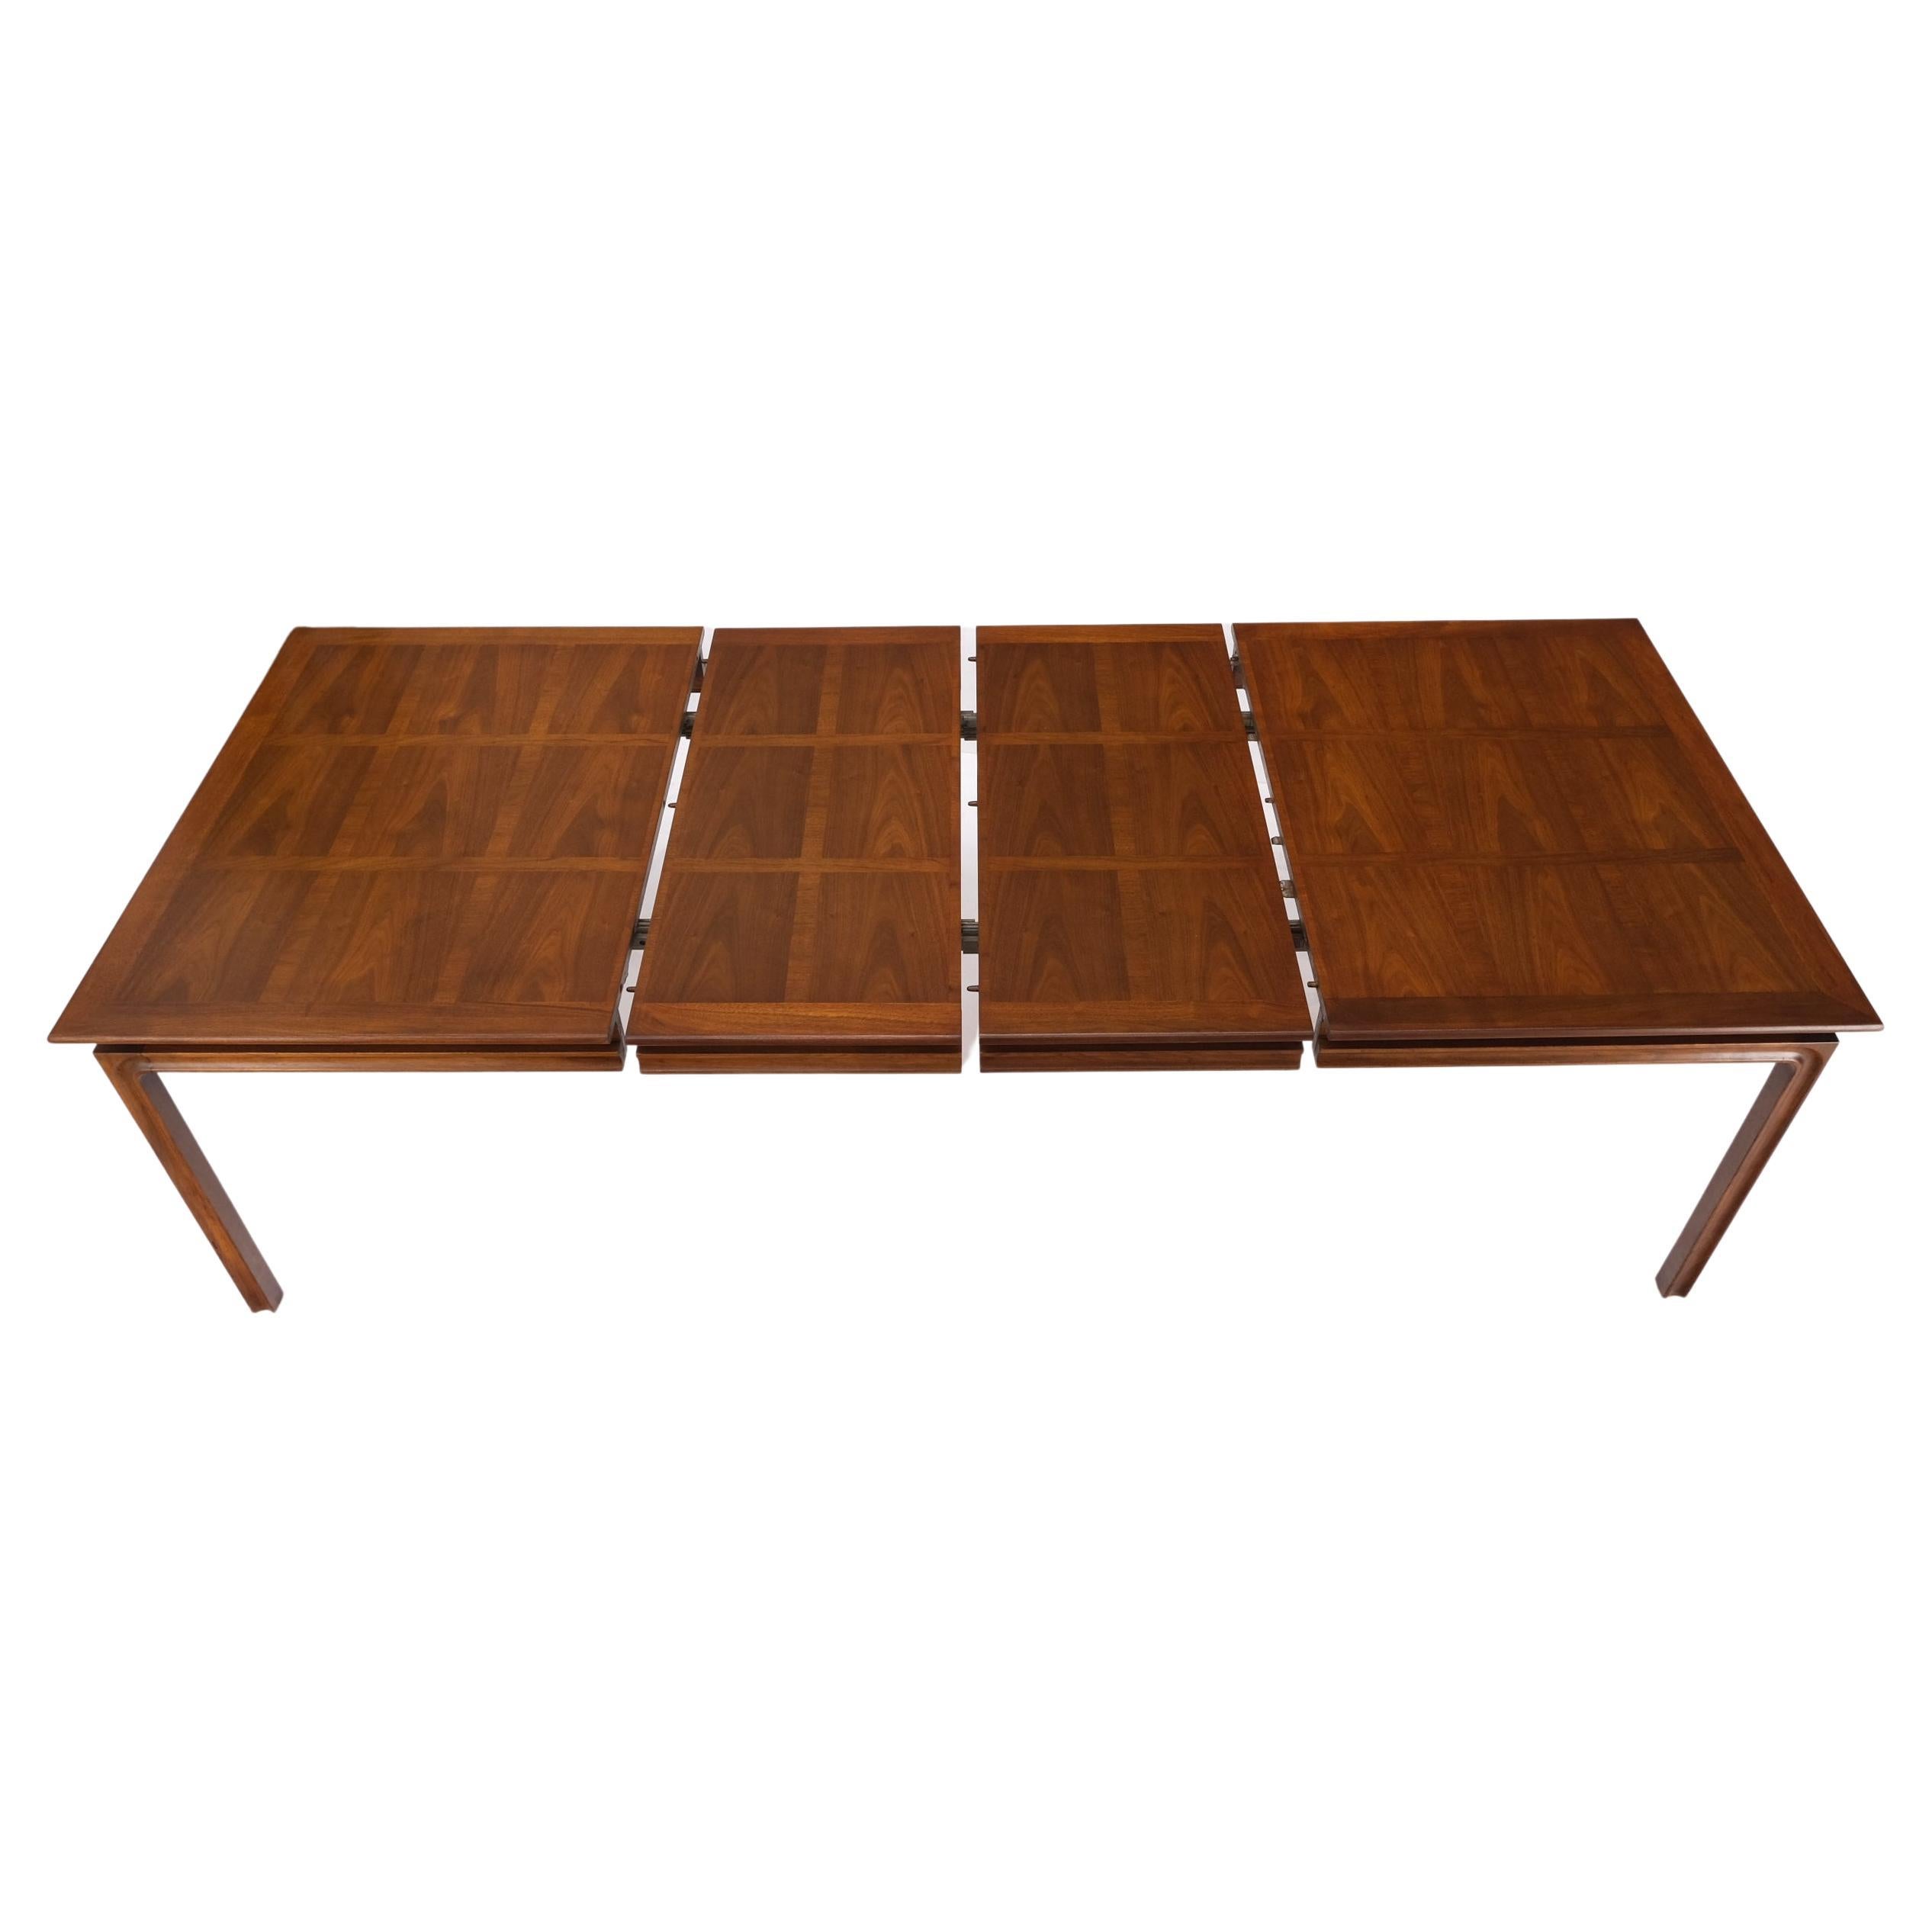 Large Oiled Walnut Two Extension Boards Leafs Rectangle Dining Table Mint For Sale